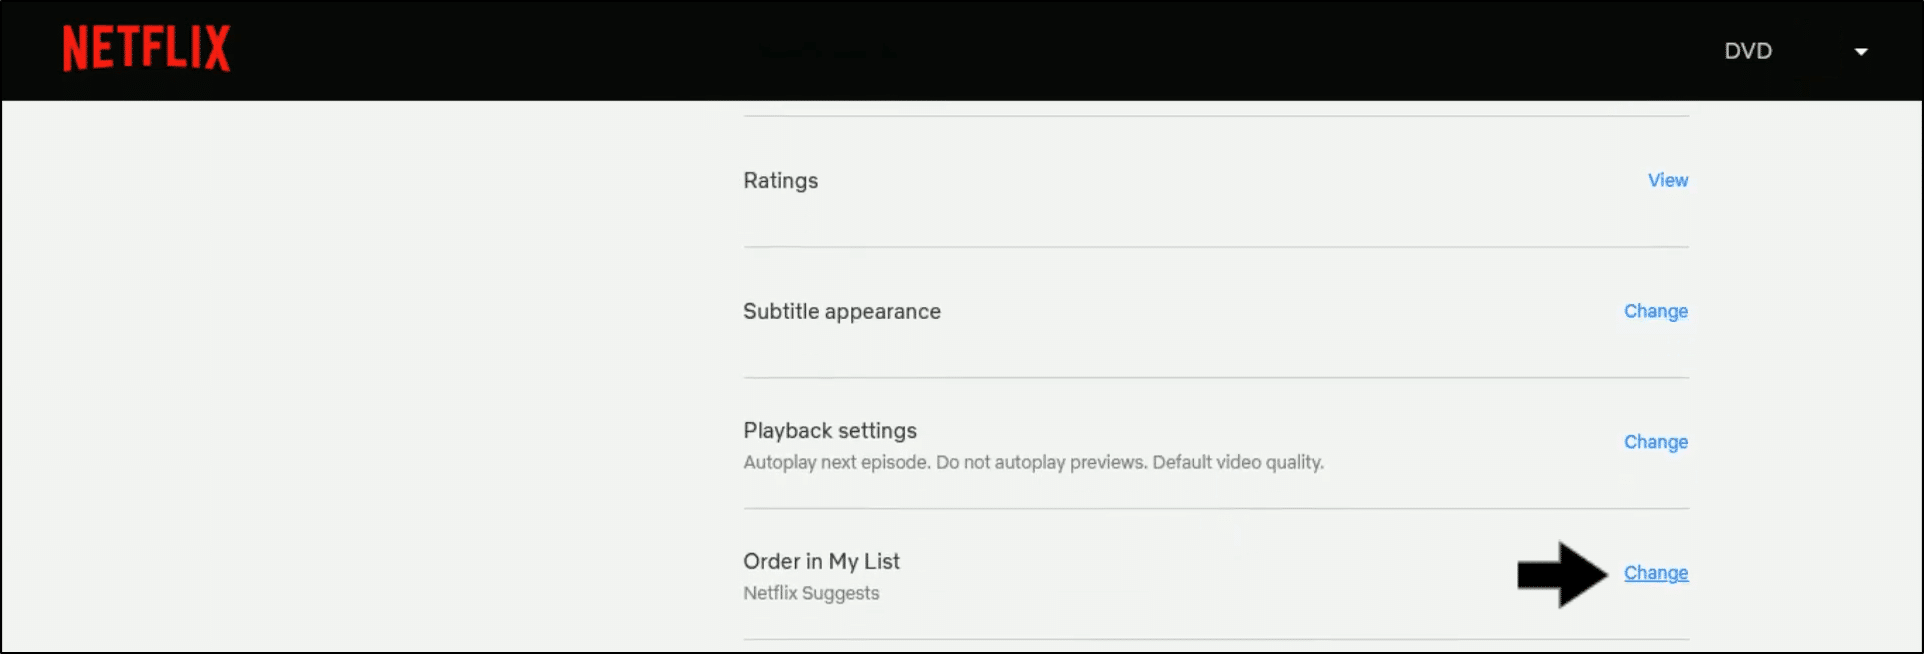 change the order in My List through the Netflix account settings to fix the Netflix Continue Watching or My List features not working, showing, loading, or updating